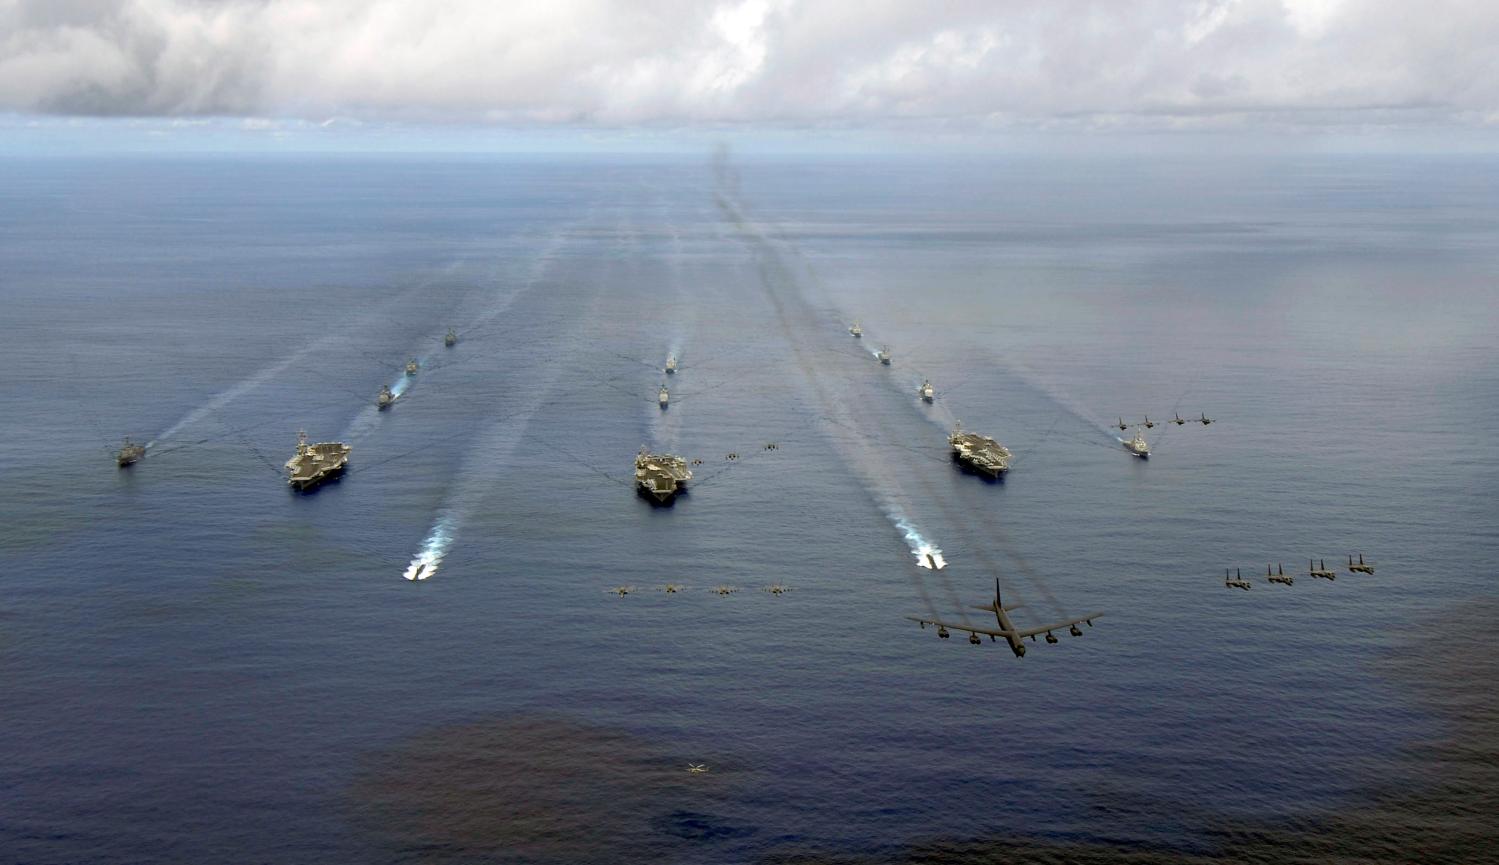 The USS Nimitz, USS Kitty Hawk and USS John C. Stennis Carrier Strike Groups transit in formation during a joint photo exercise during exercise Valiant Shield 2007 in the Pacific Ocean in this August 14, 2007 handout photo. The aerial formation consists of aircraft from the carrier strike groups as well as Air Force aircraft. Mass Communication Specialist Seaman Stephen W. Rowe/U.S. Navy/Handout via REUTERS ATTENTION EDITORS - THIS IMAGE WAS PROVIDED BY A THIRD PARTY. - RC14D1EA2880